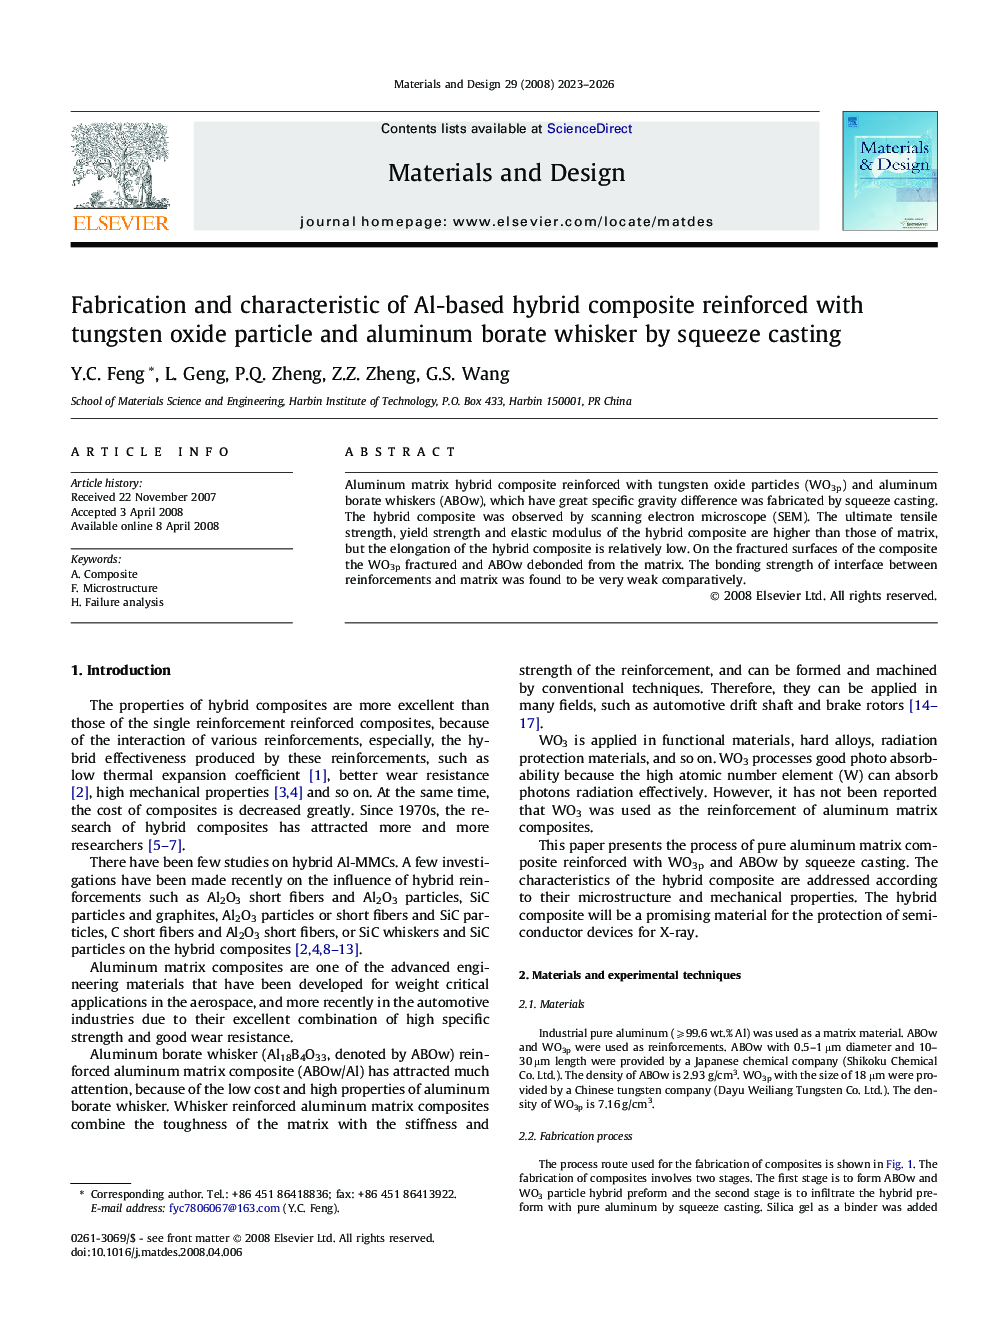 Fabrication and characteristic of Al-based hybrid composite reinforced with tungsten oxide particle and aluminum borate whisker by squeeze casting